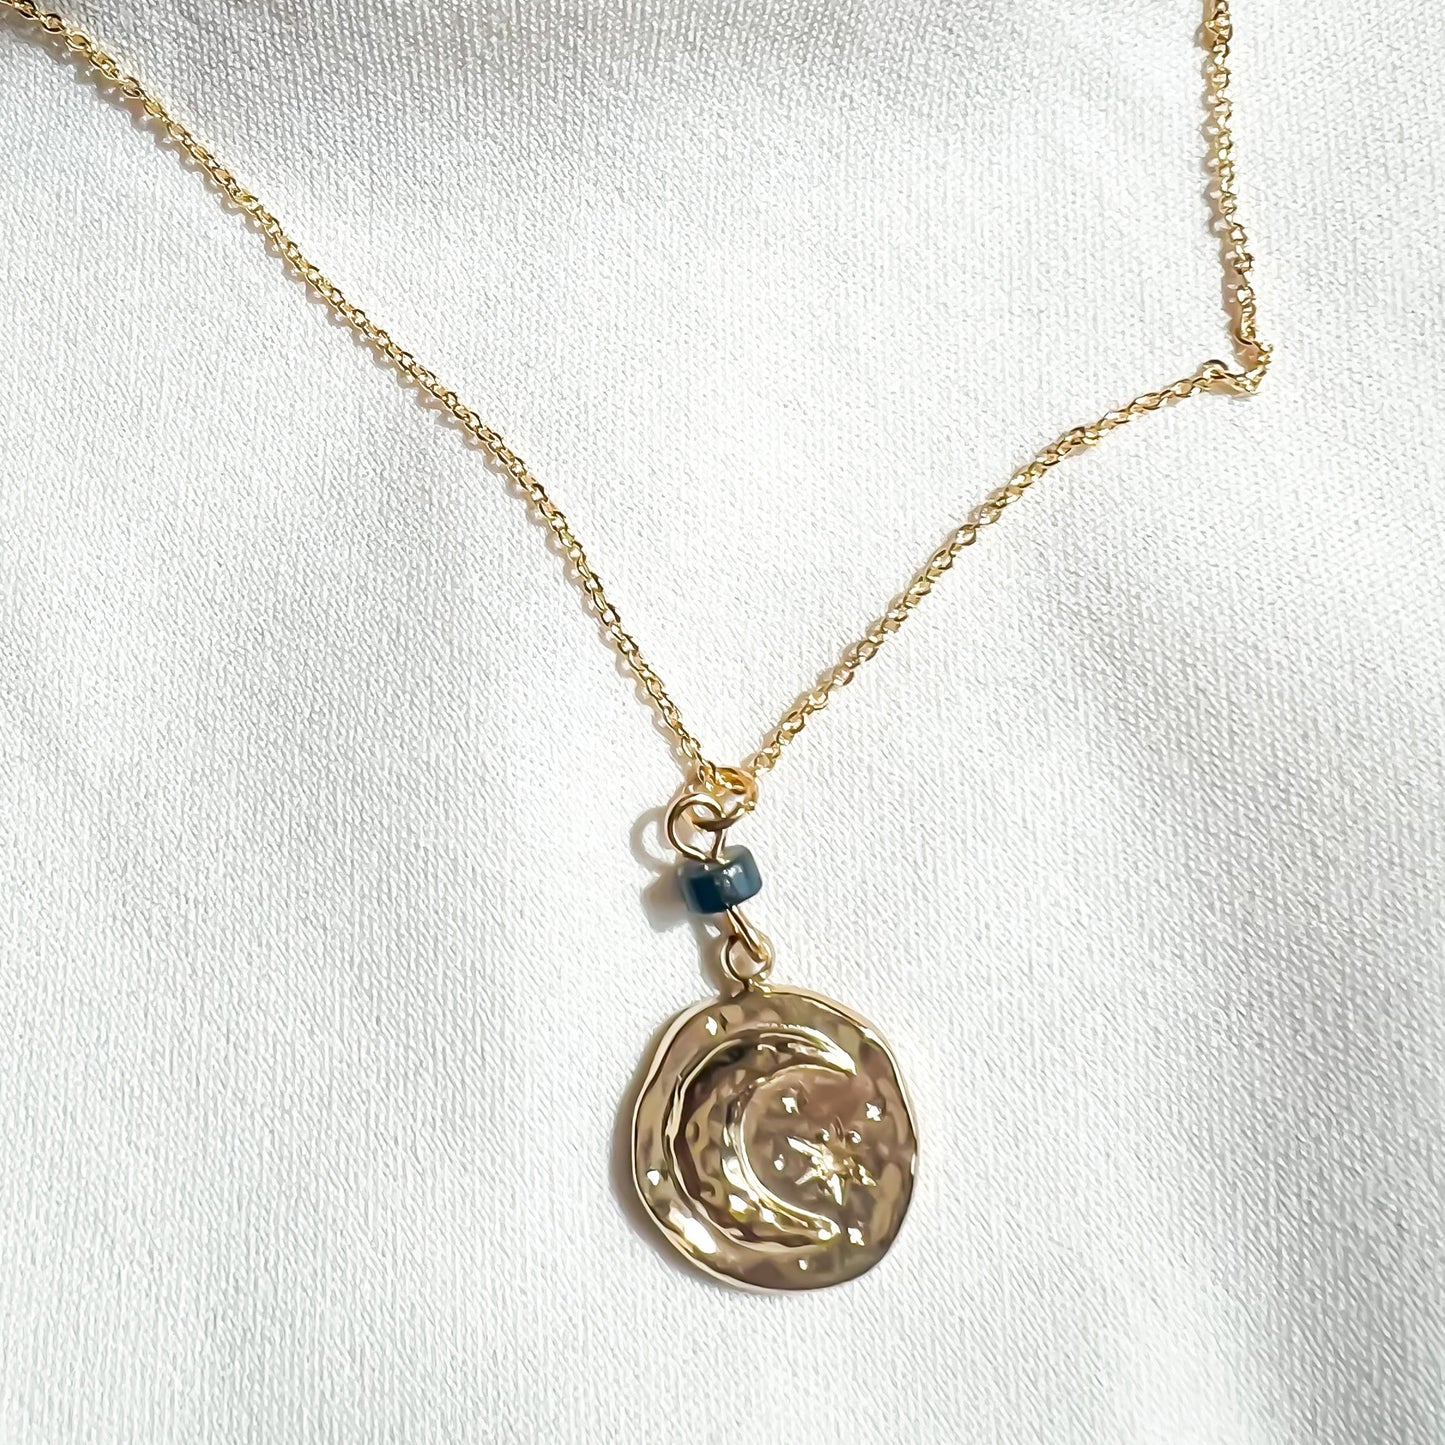 The Blue Moon Necklace